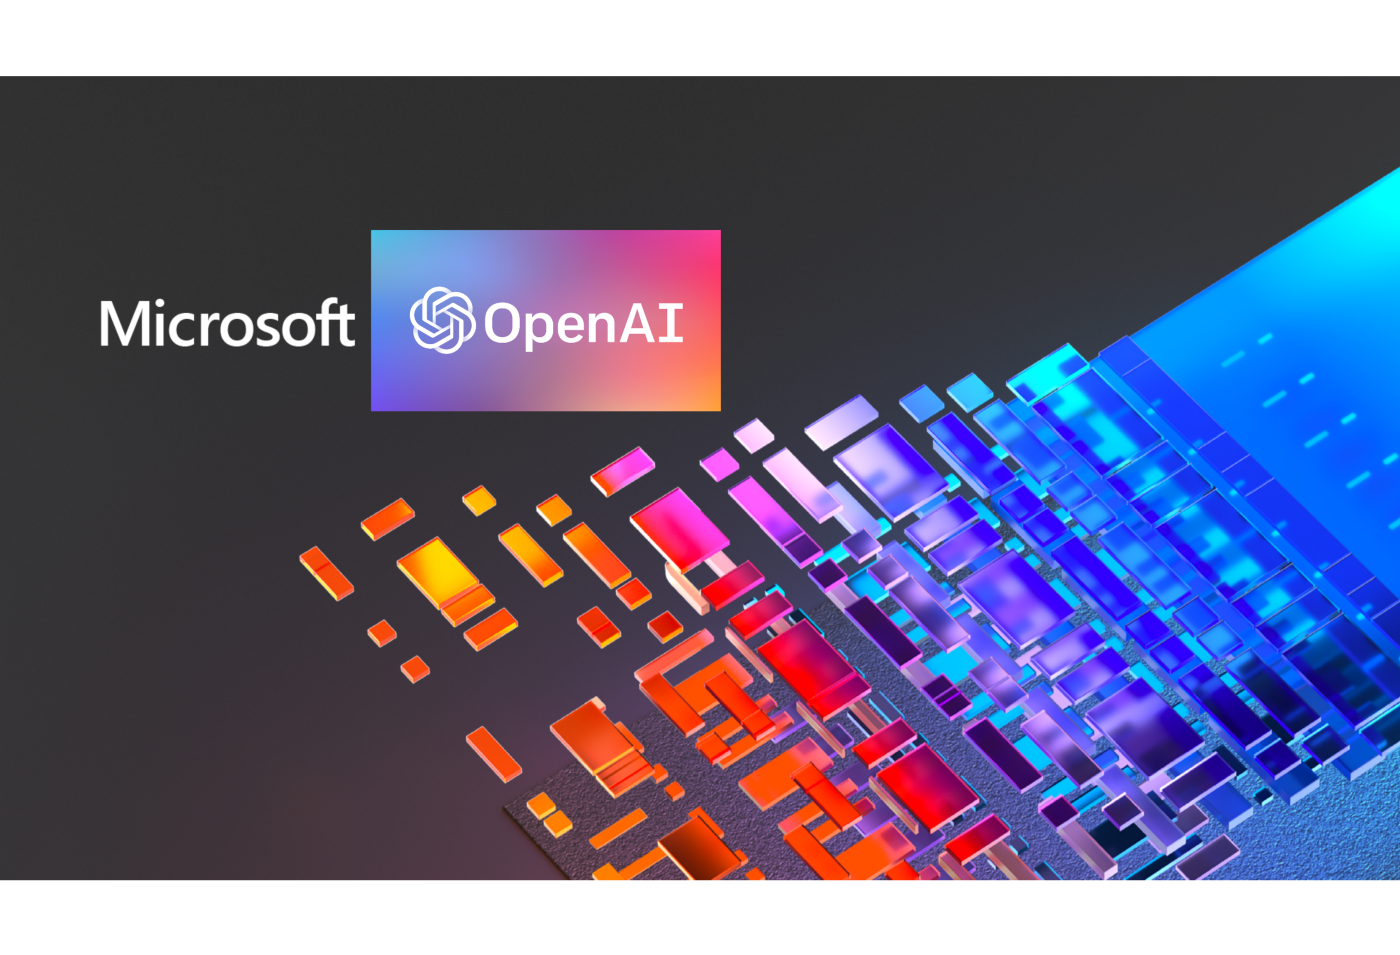 Microsoft can integrate OpenAi into Word, Excel and PowerPoint